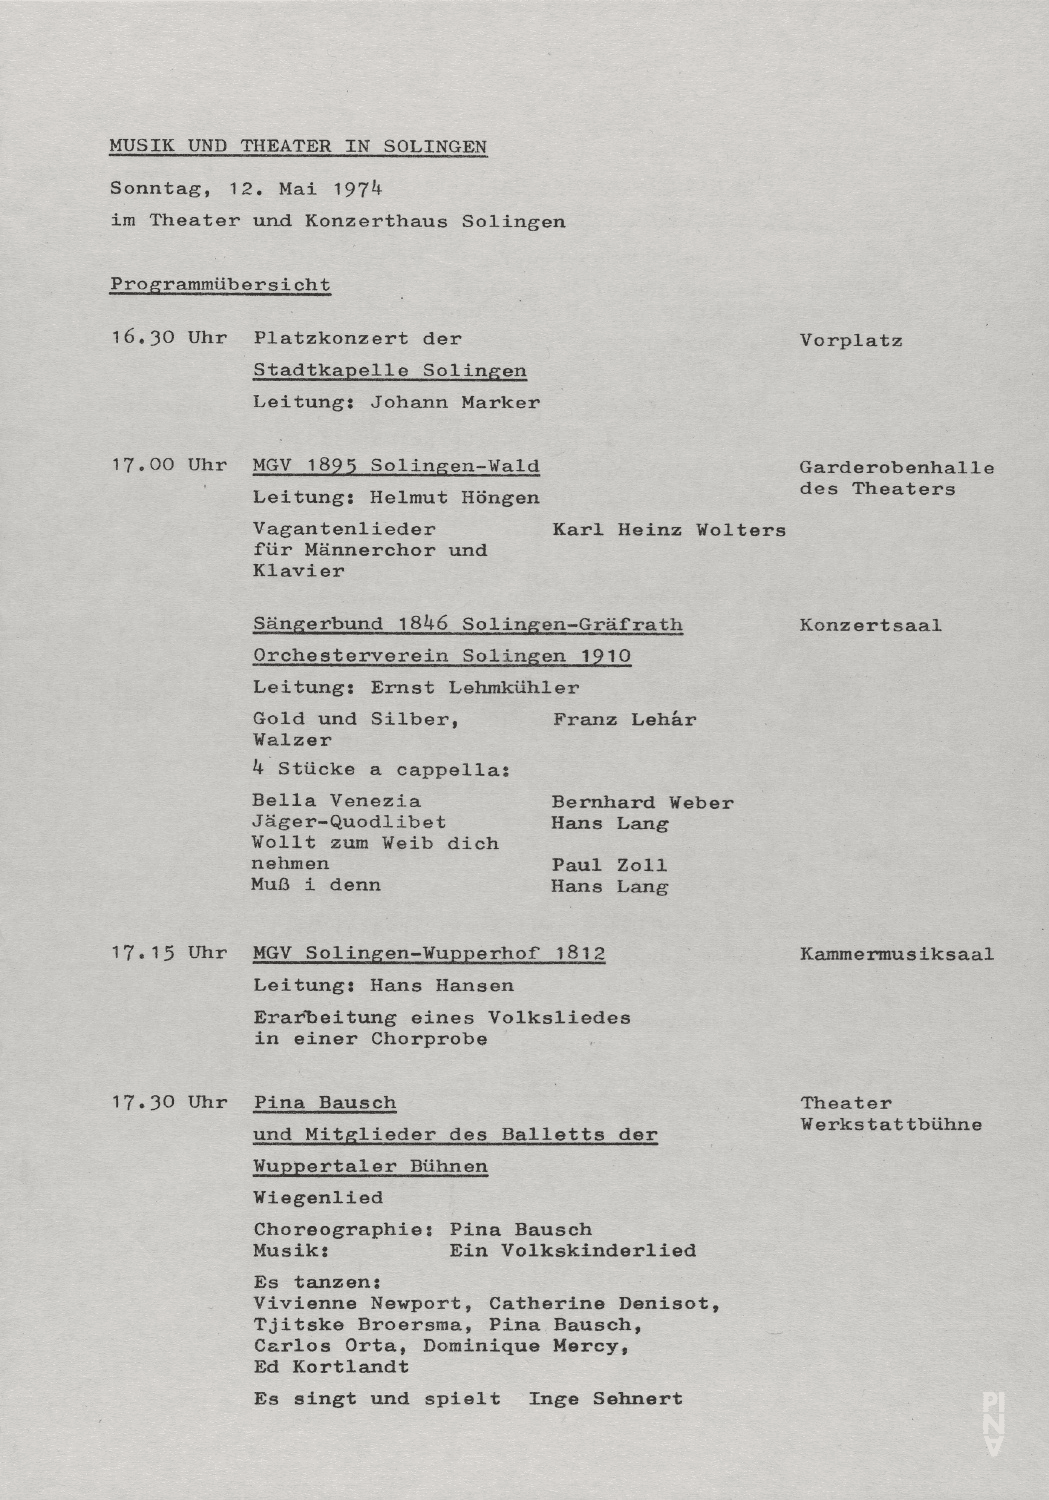 Evening leaflet for “PHILIPS 836 885 DSY” and “Wiegenlied” by Pina Bausch with Tanztheater Wuppertal in in Solingen, May 12, 1974